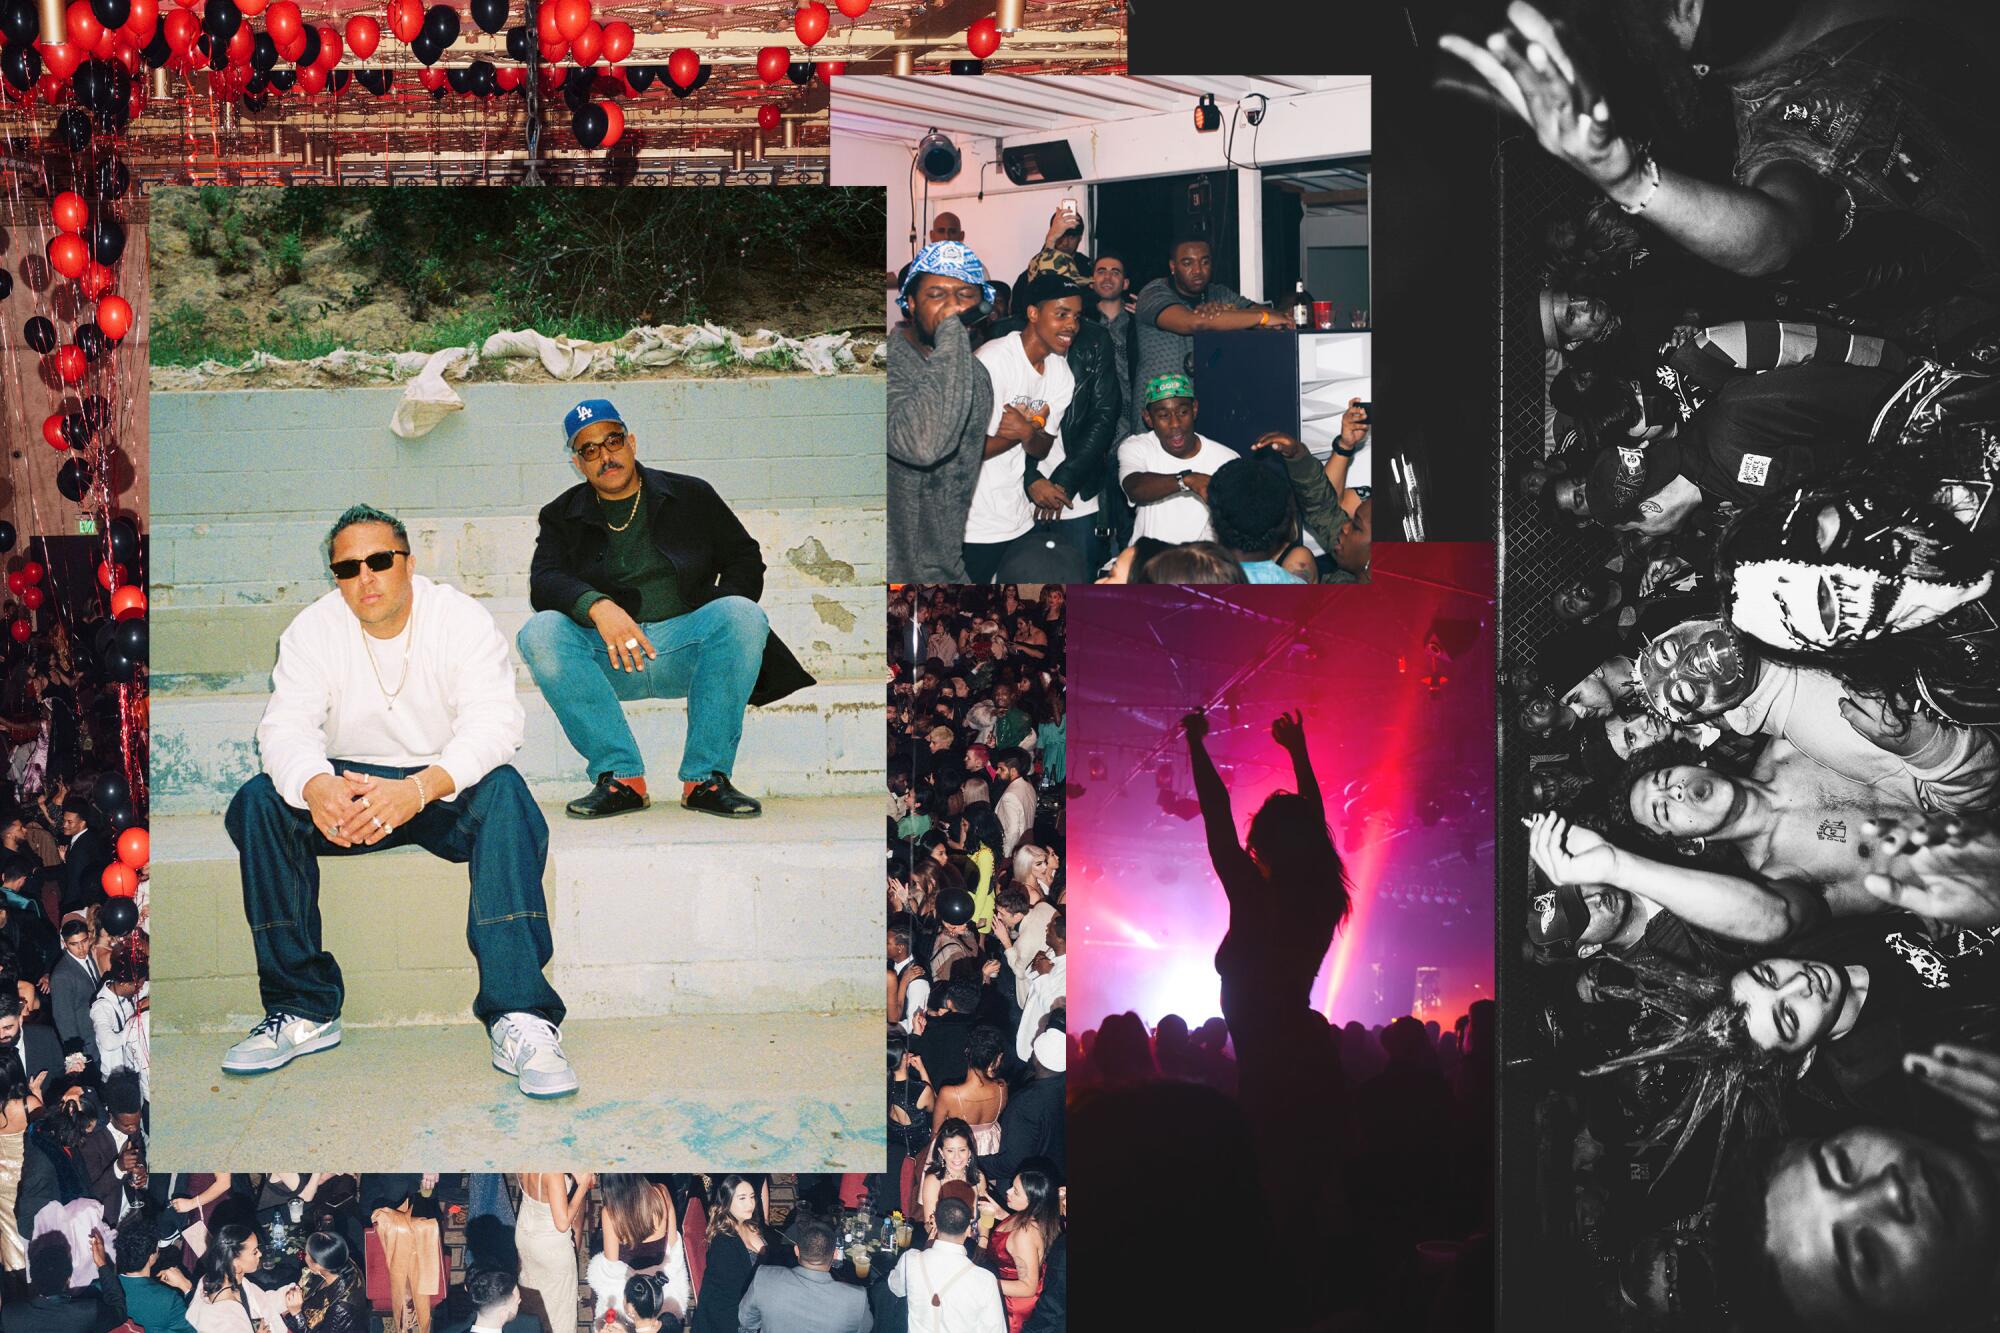 Collage of the parties organized by streetwear brand Born X Raised.